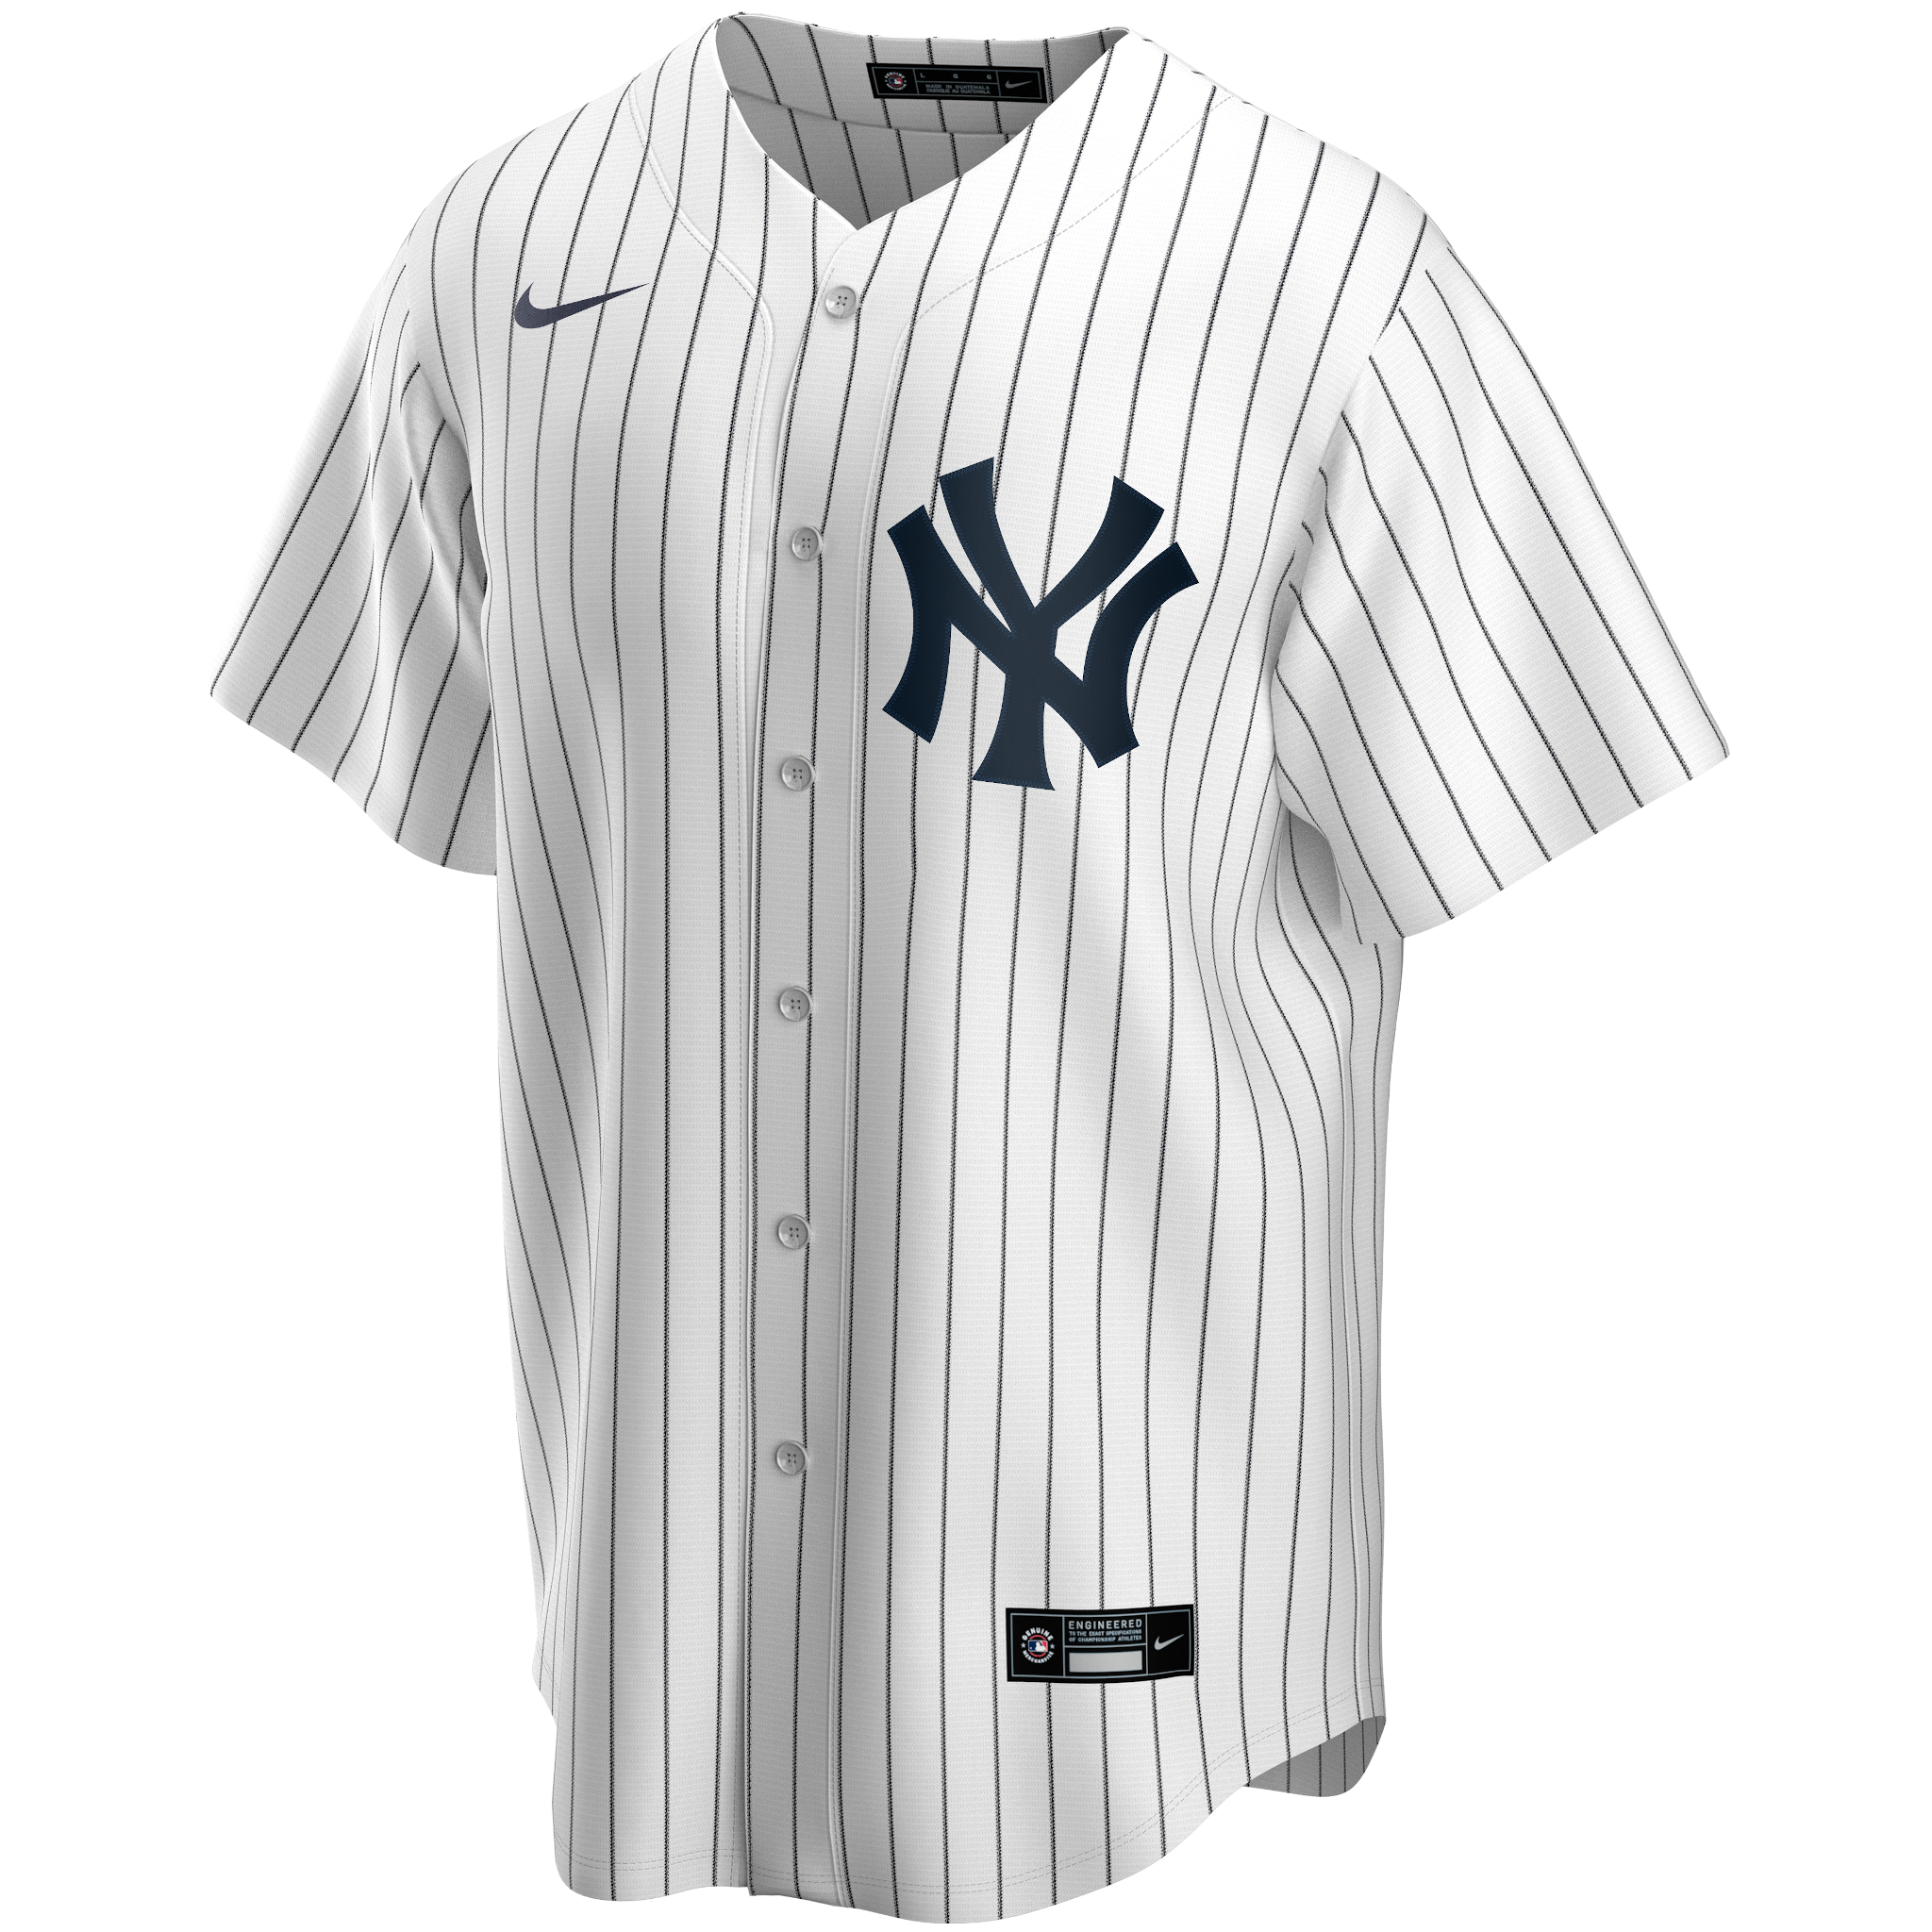 21014 Nike NEW YORK YANKEES Authentic Game 100% REAL NIKE Jersey